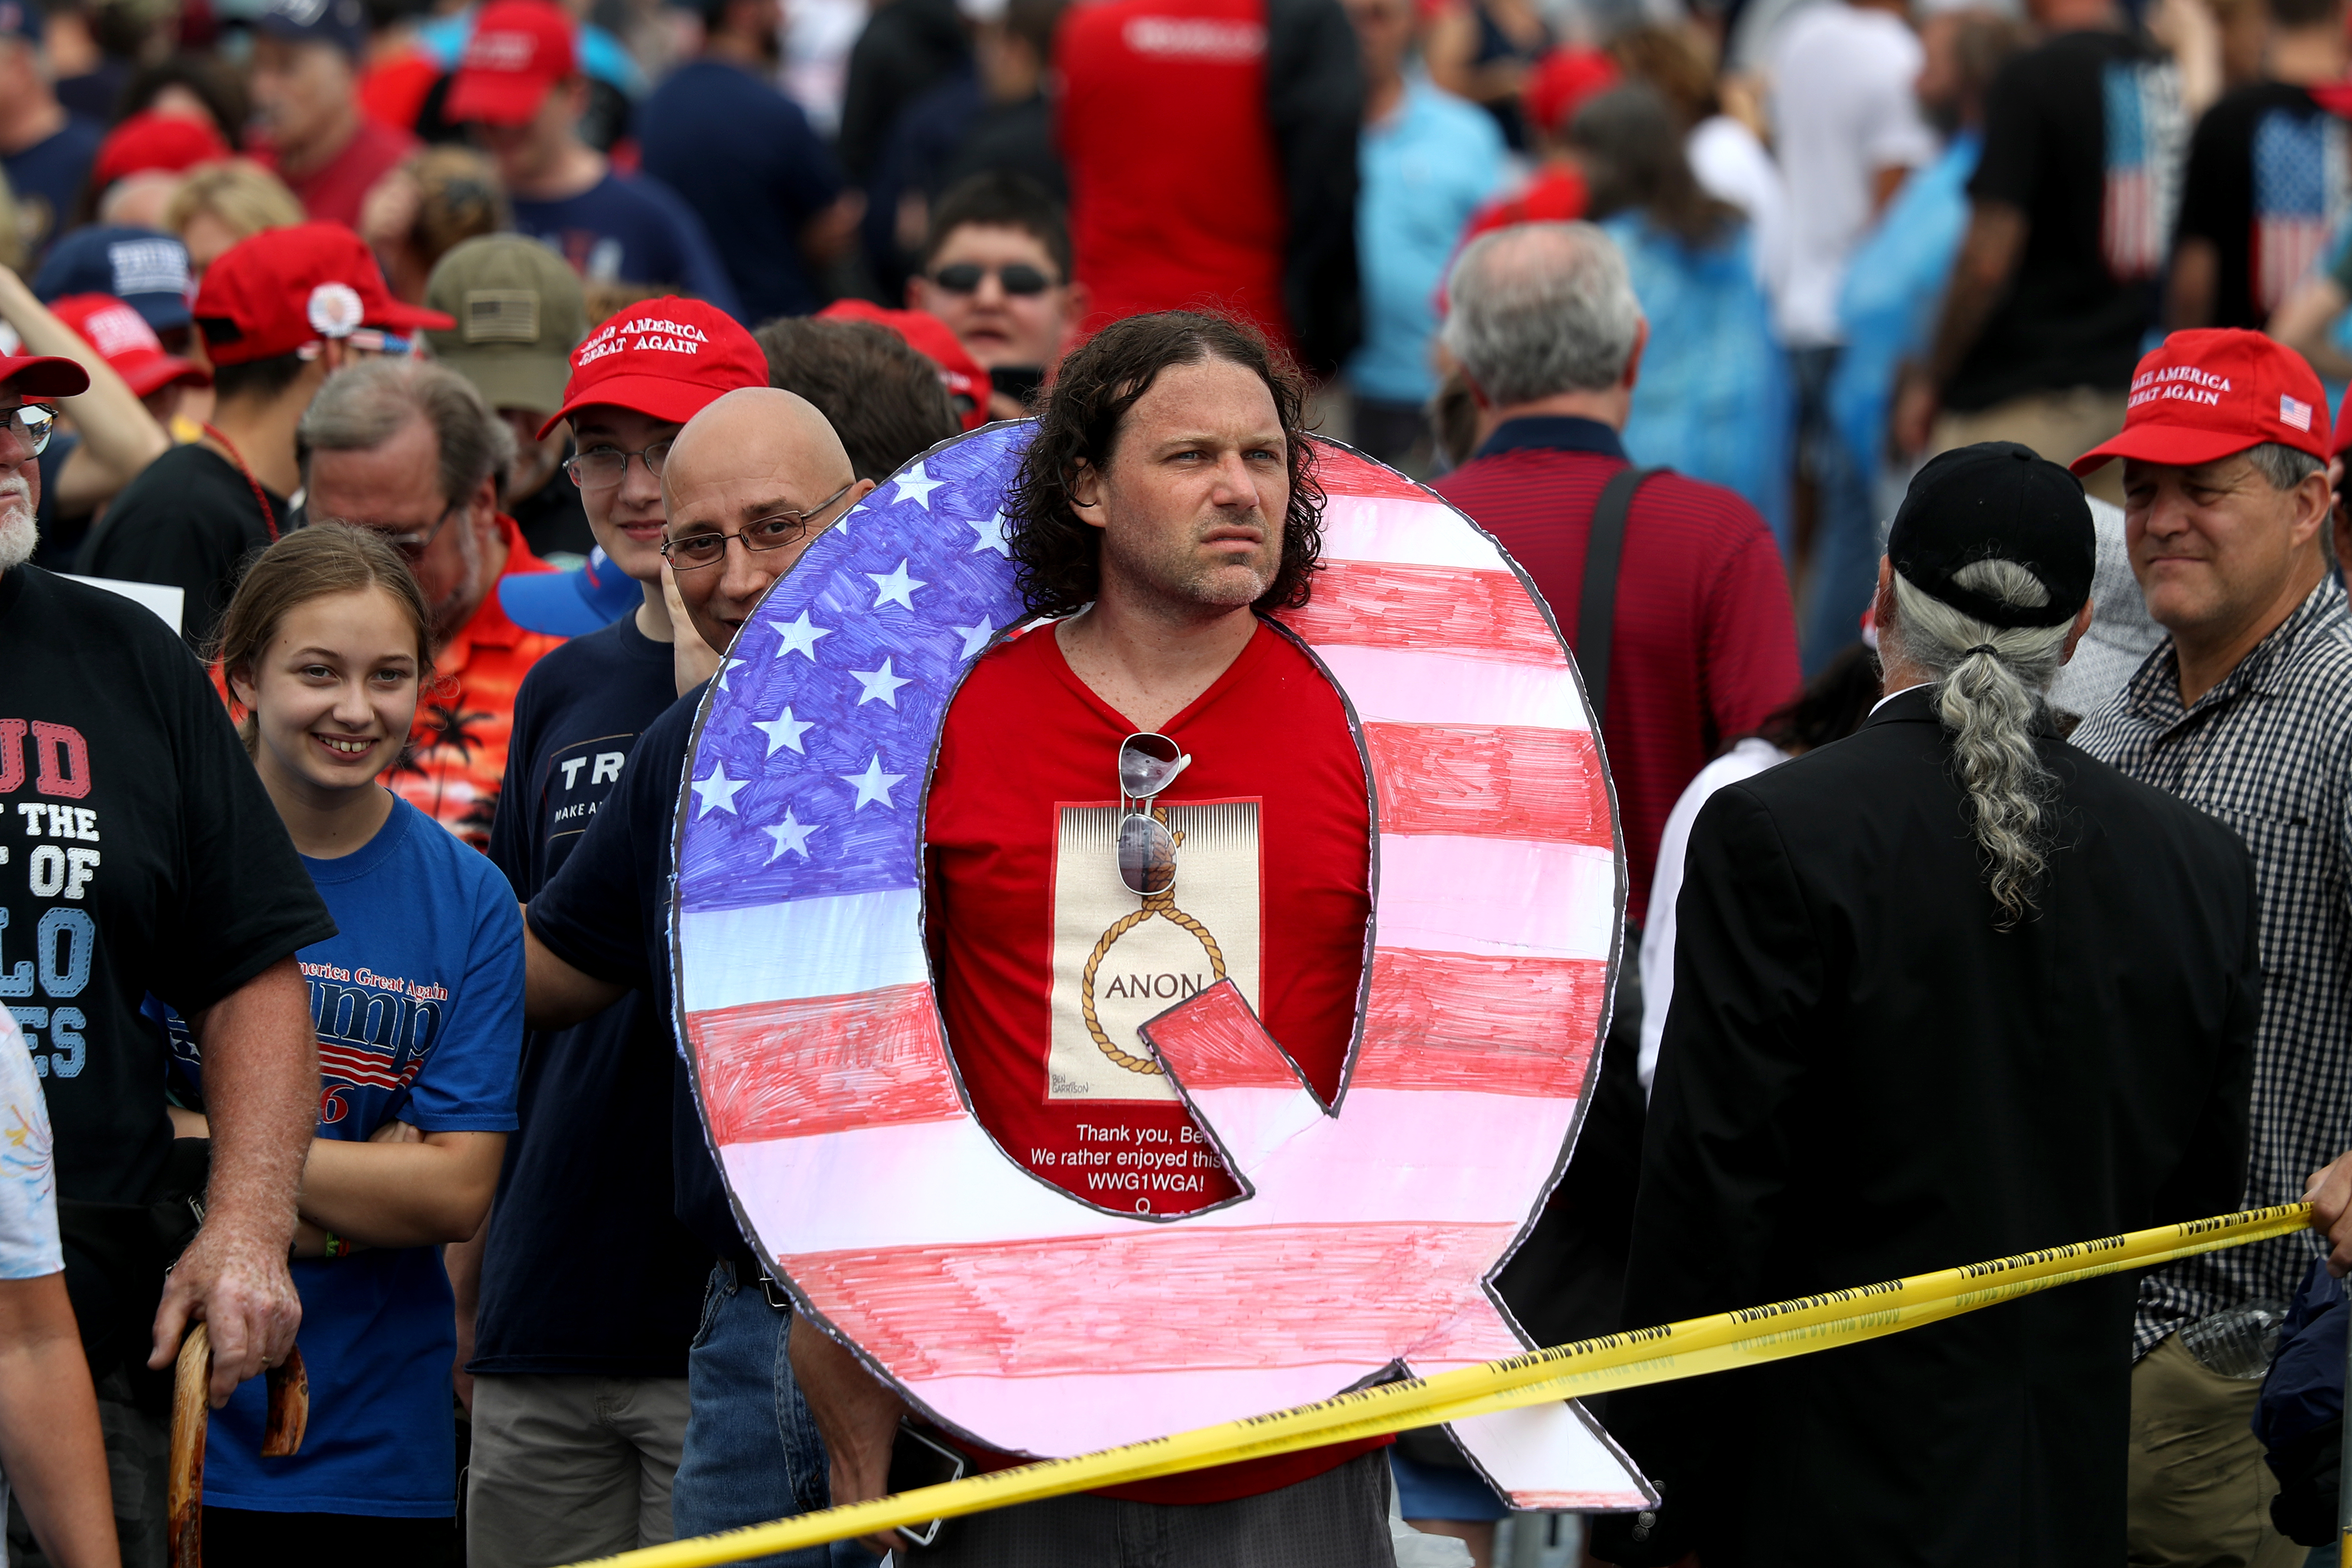 Trump rally attendee wearing a red shirt holds a large red, white, and blue “Q” sign while waiting in line on to see President Donald J. Trump at his rally August 2, 2018. “Q” represents QAnon, a debunked conspiracy theory group.